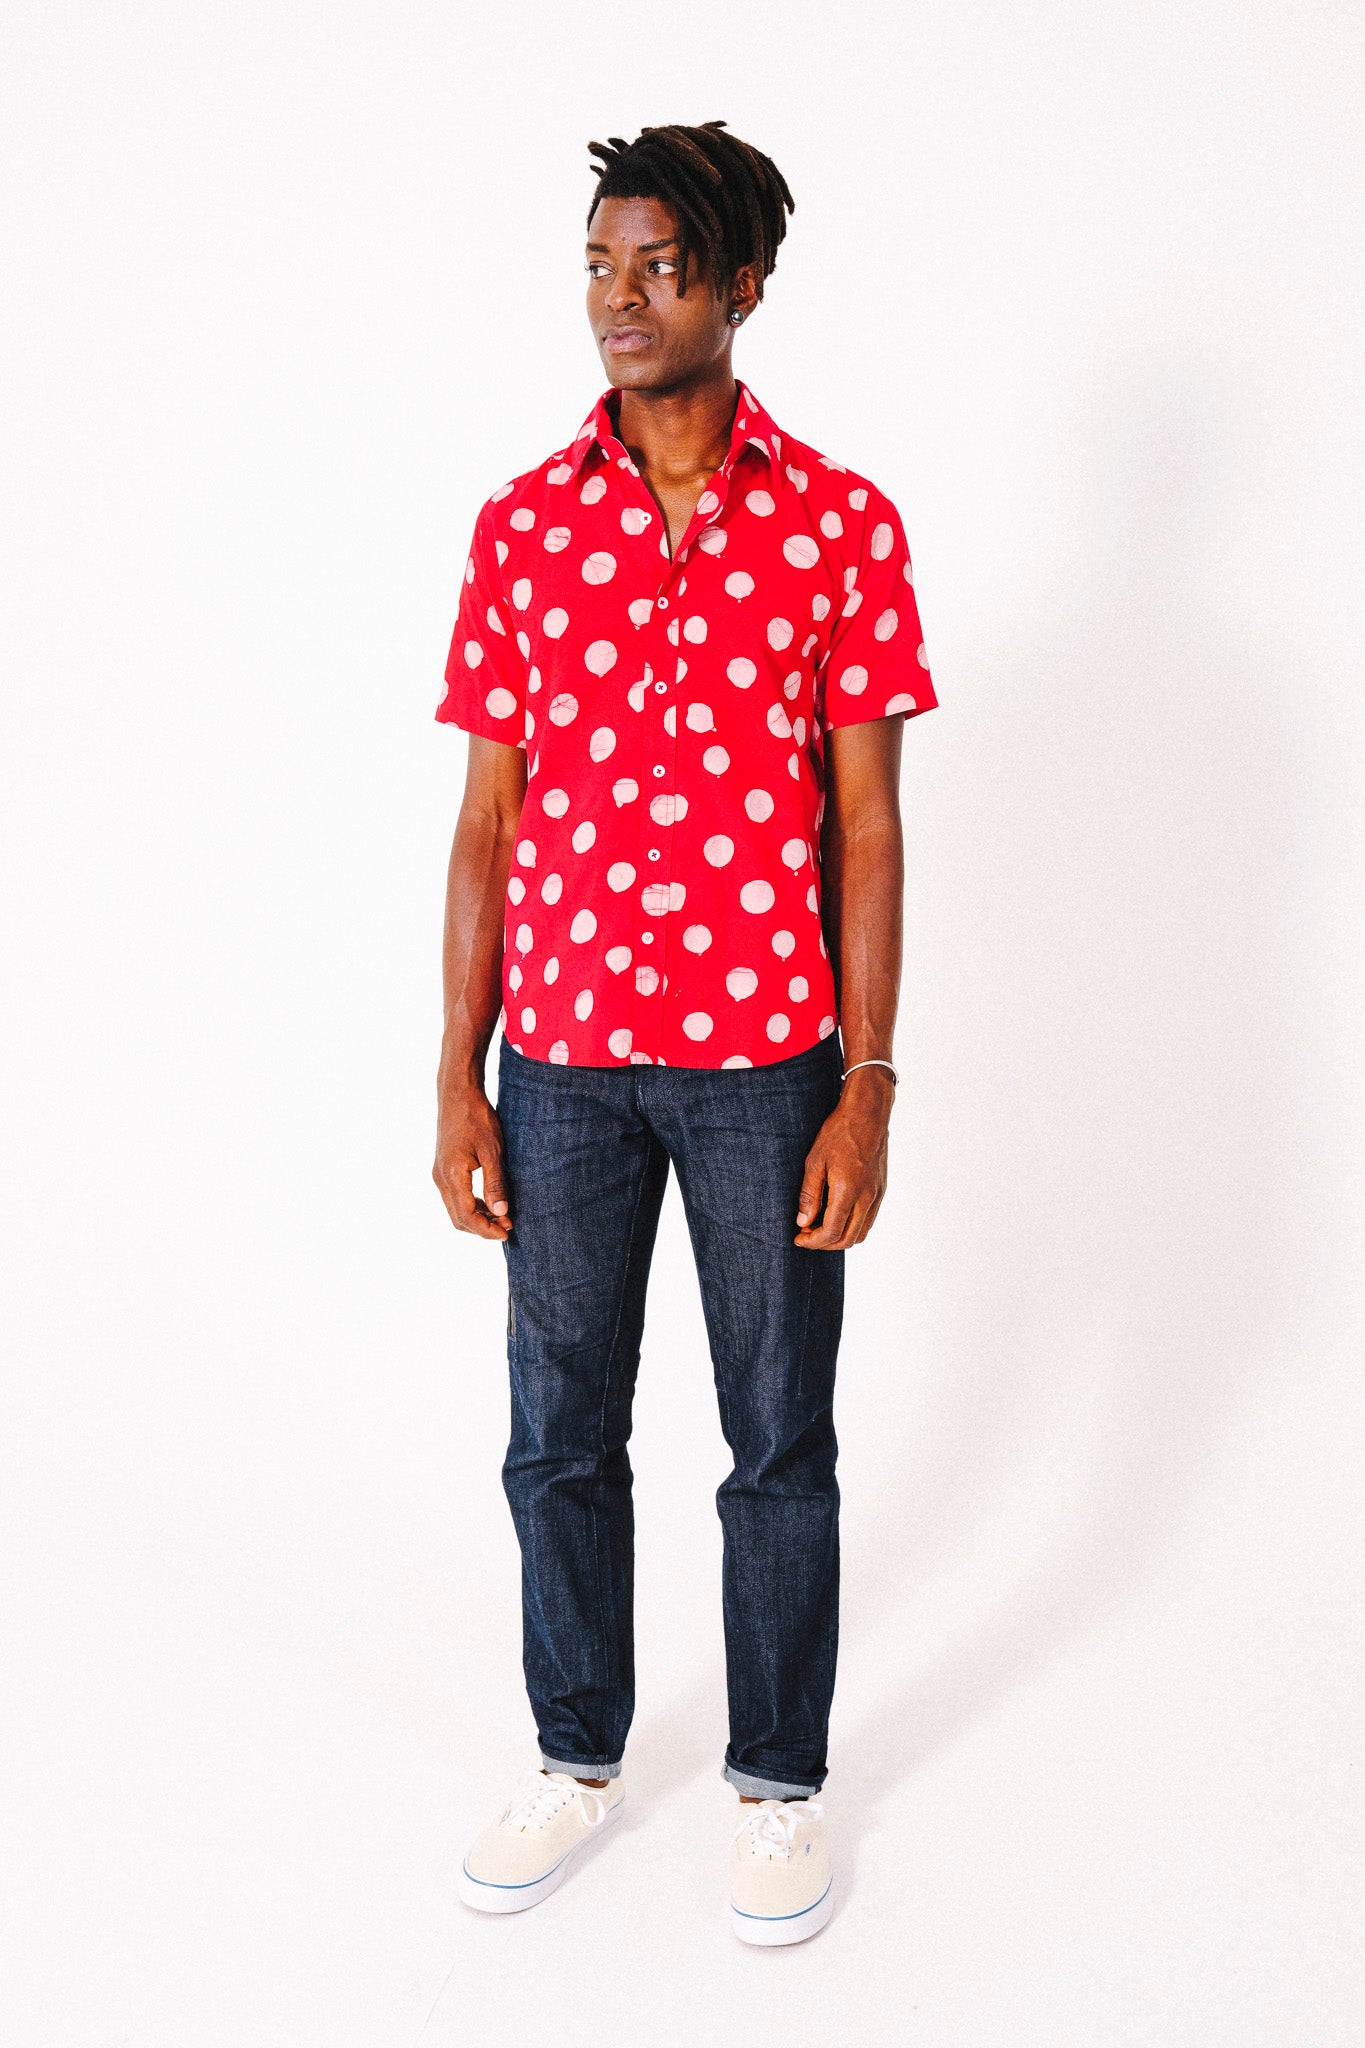 Hand Block Printed 'The Aby' Short Sleeve Shirt in Red and White Batik Dots Print